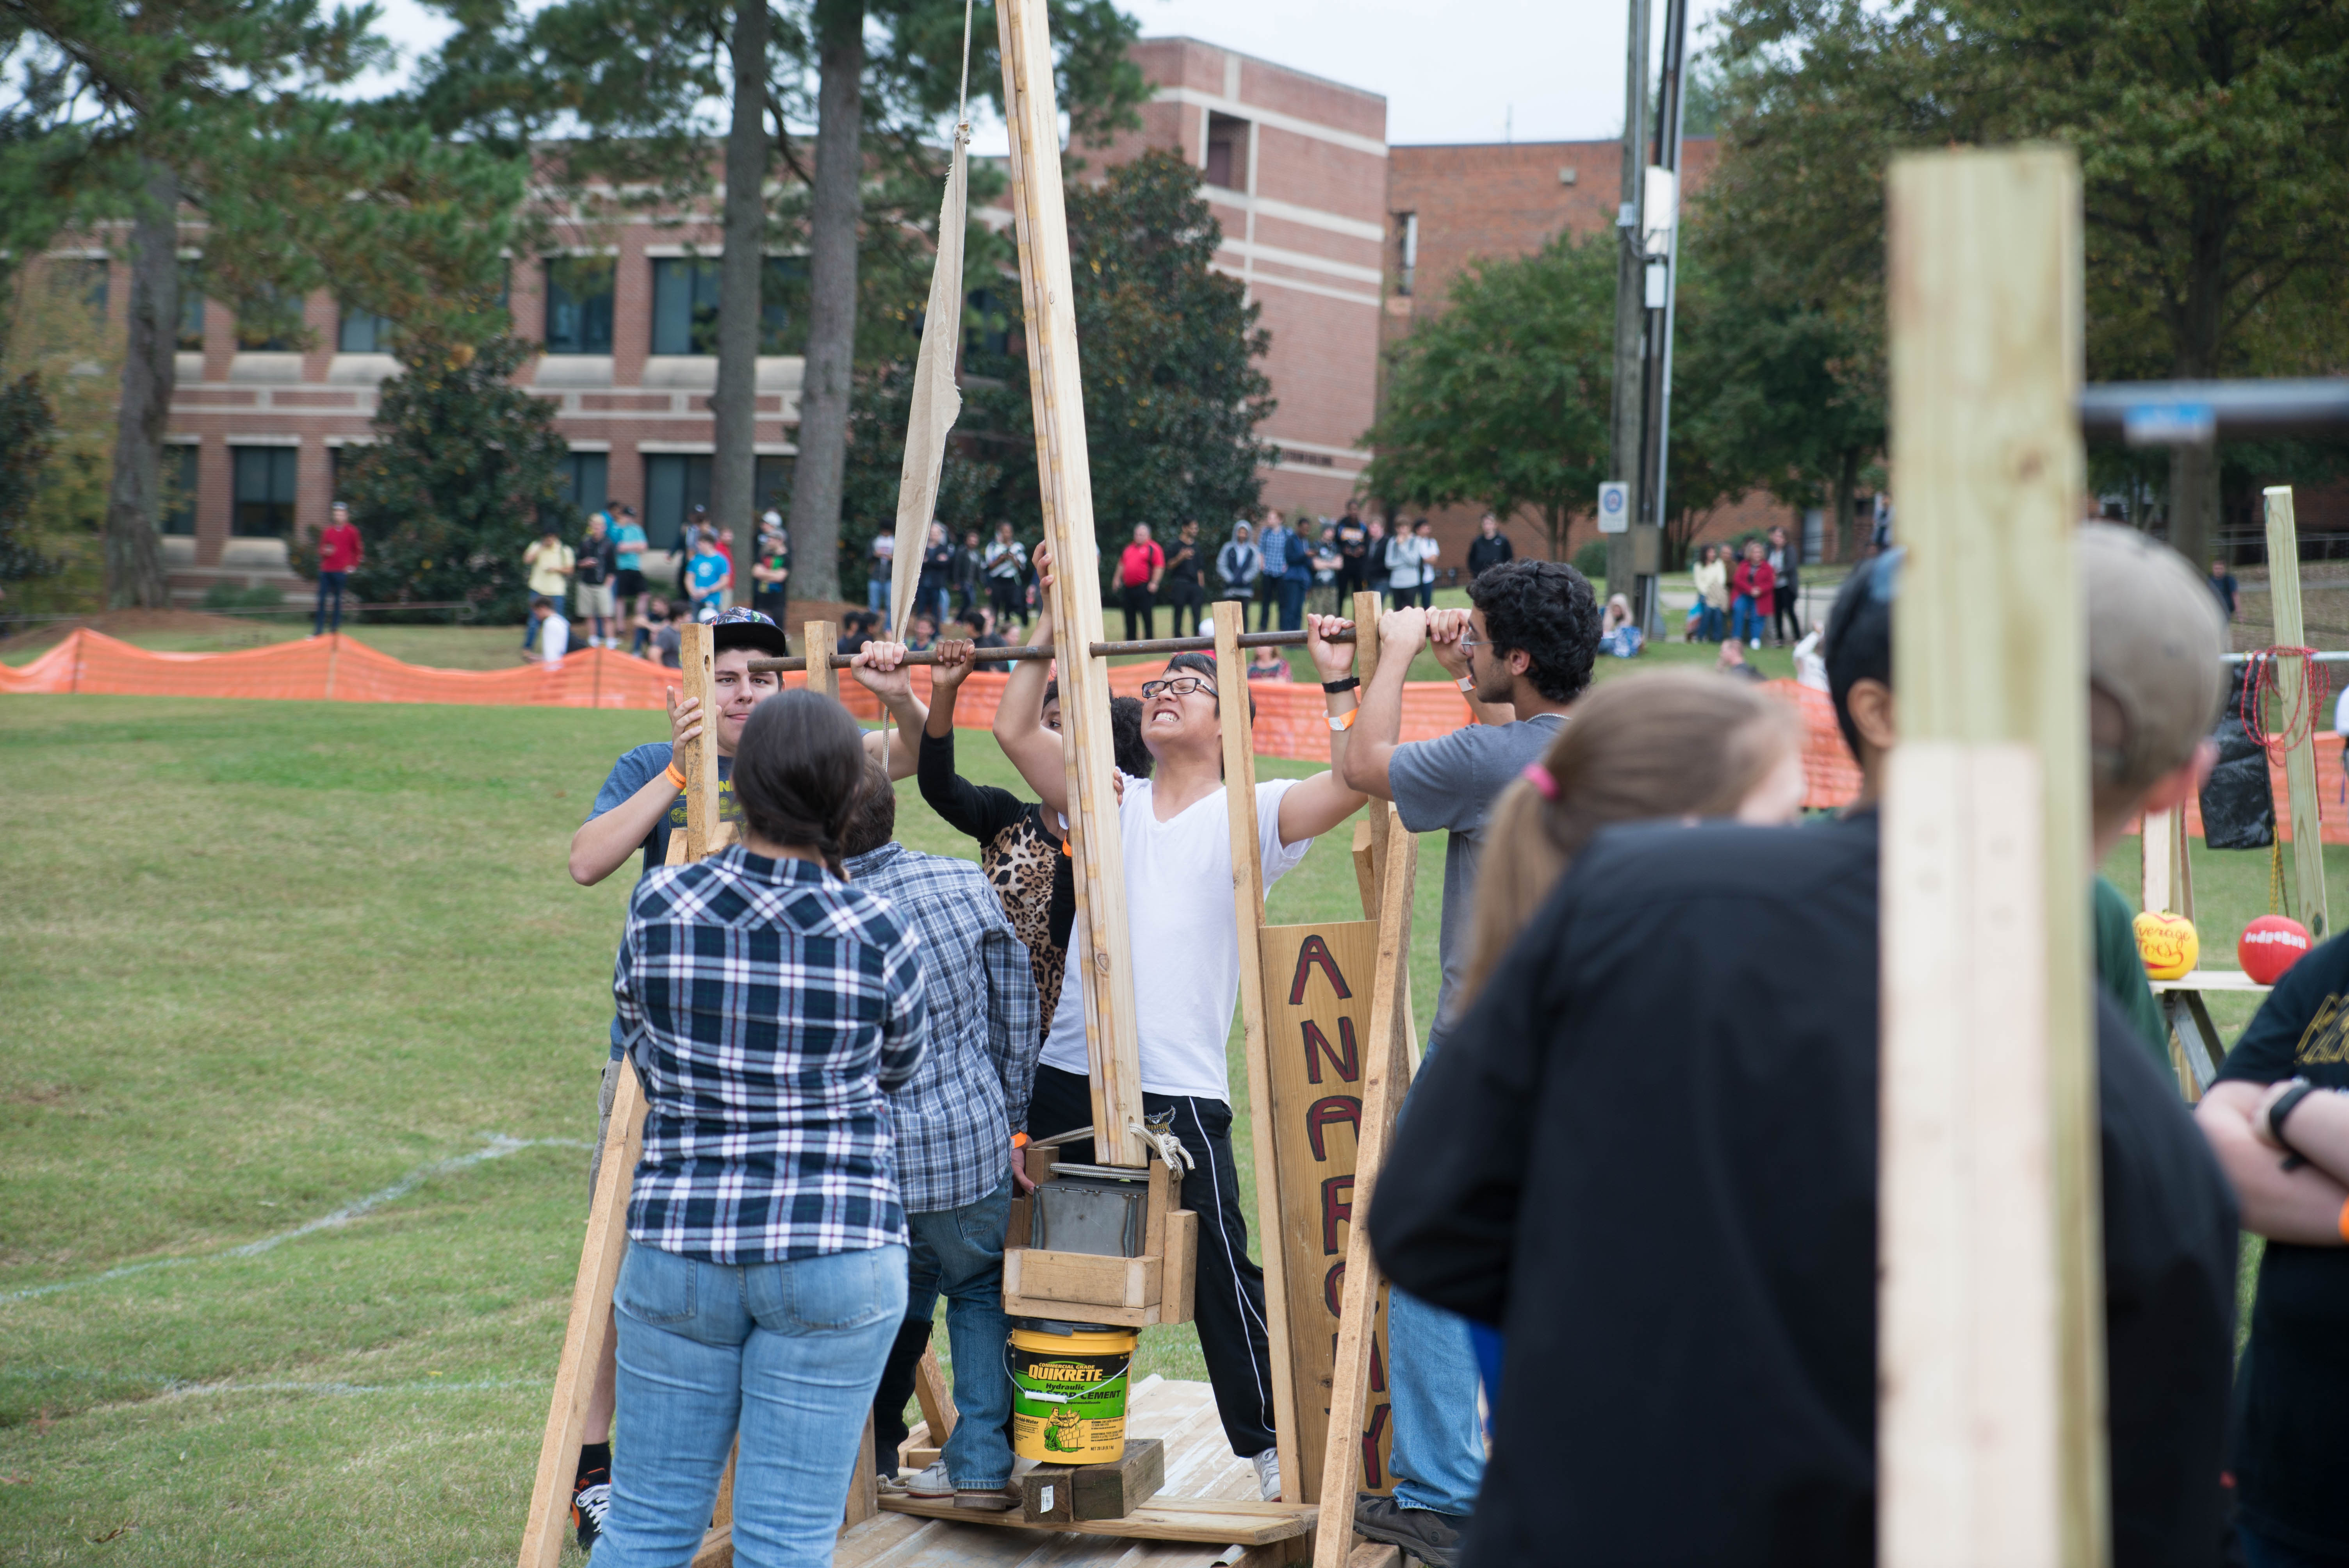 Excitement Flies at the Sixth Annual Pumpkin Launch